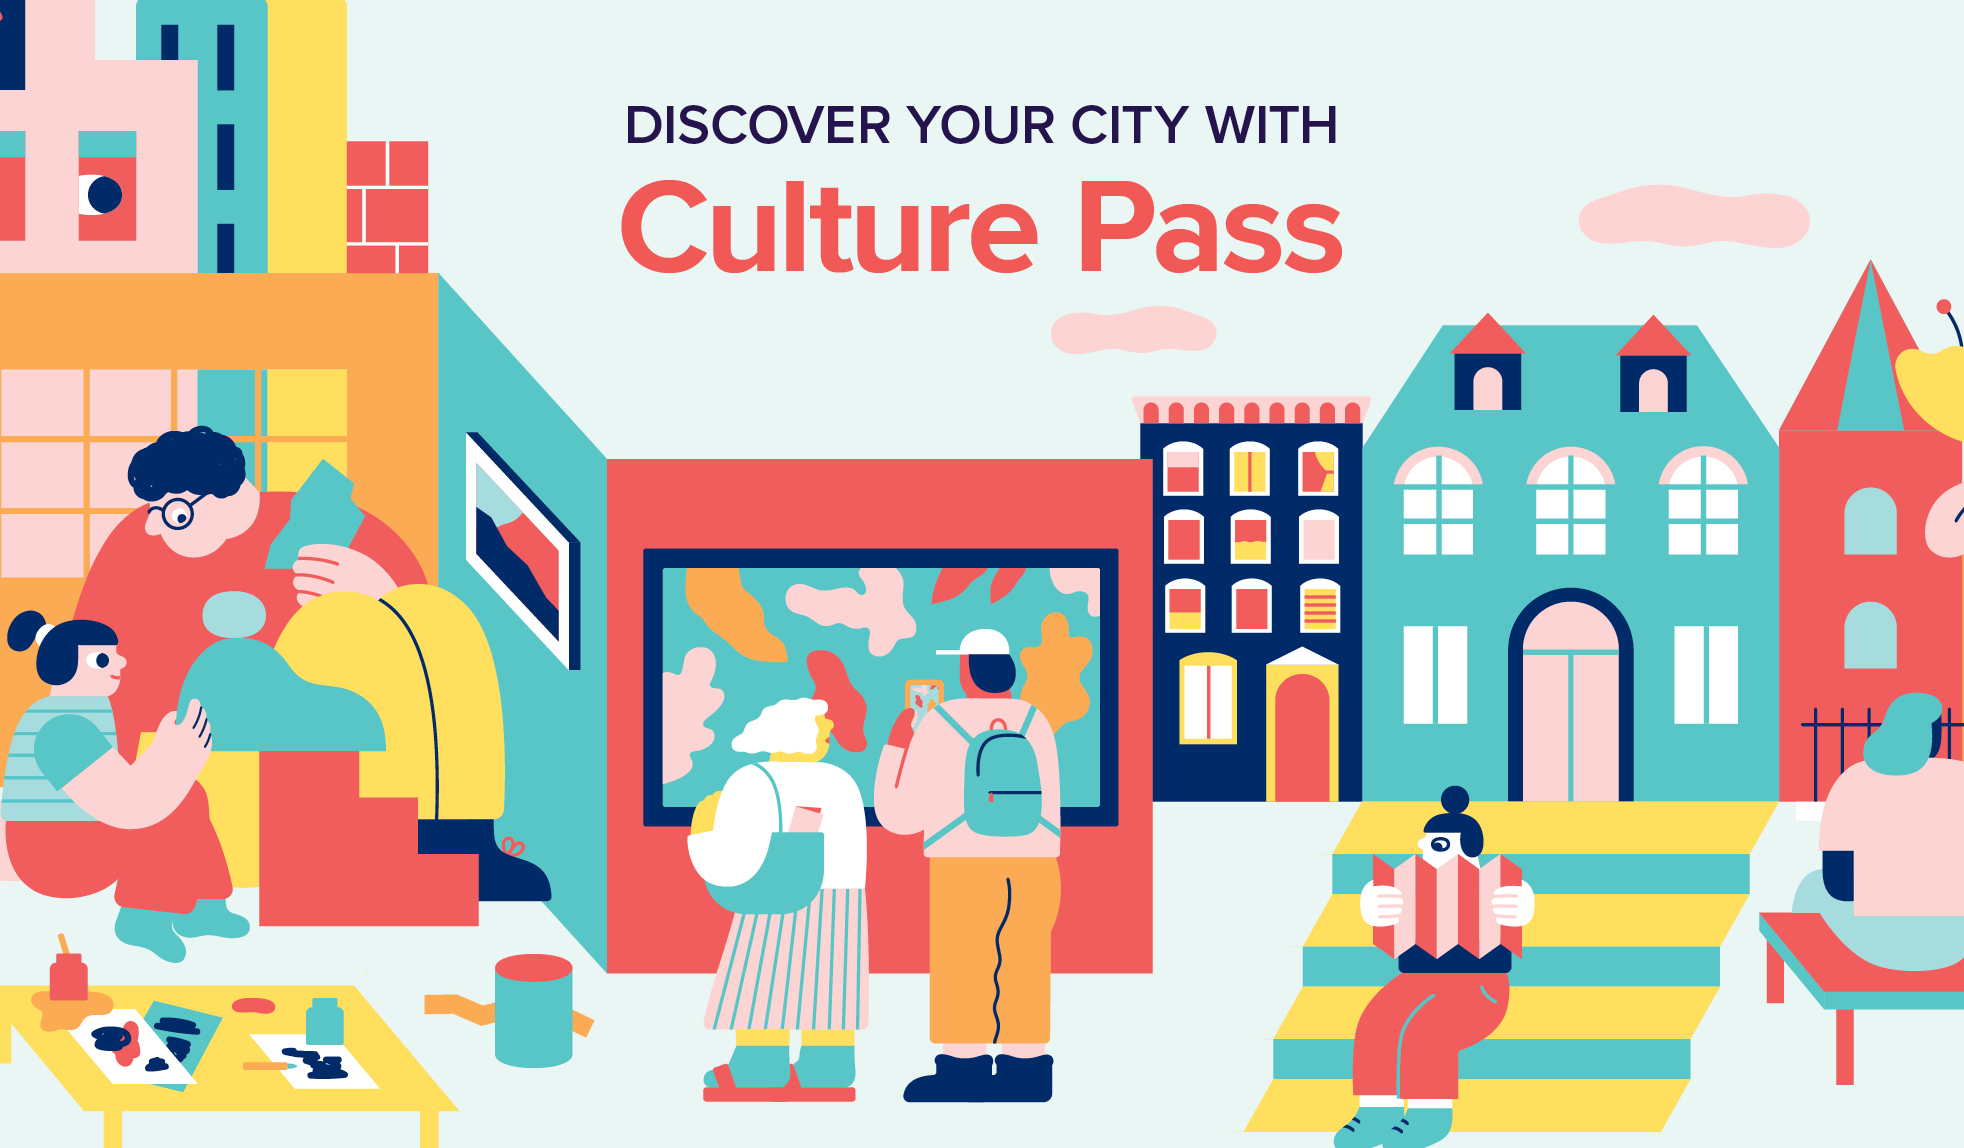 Use your library card to get your free pass to NYC's culture!